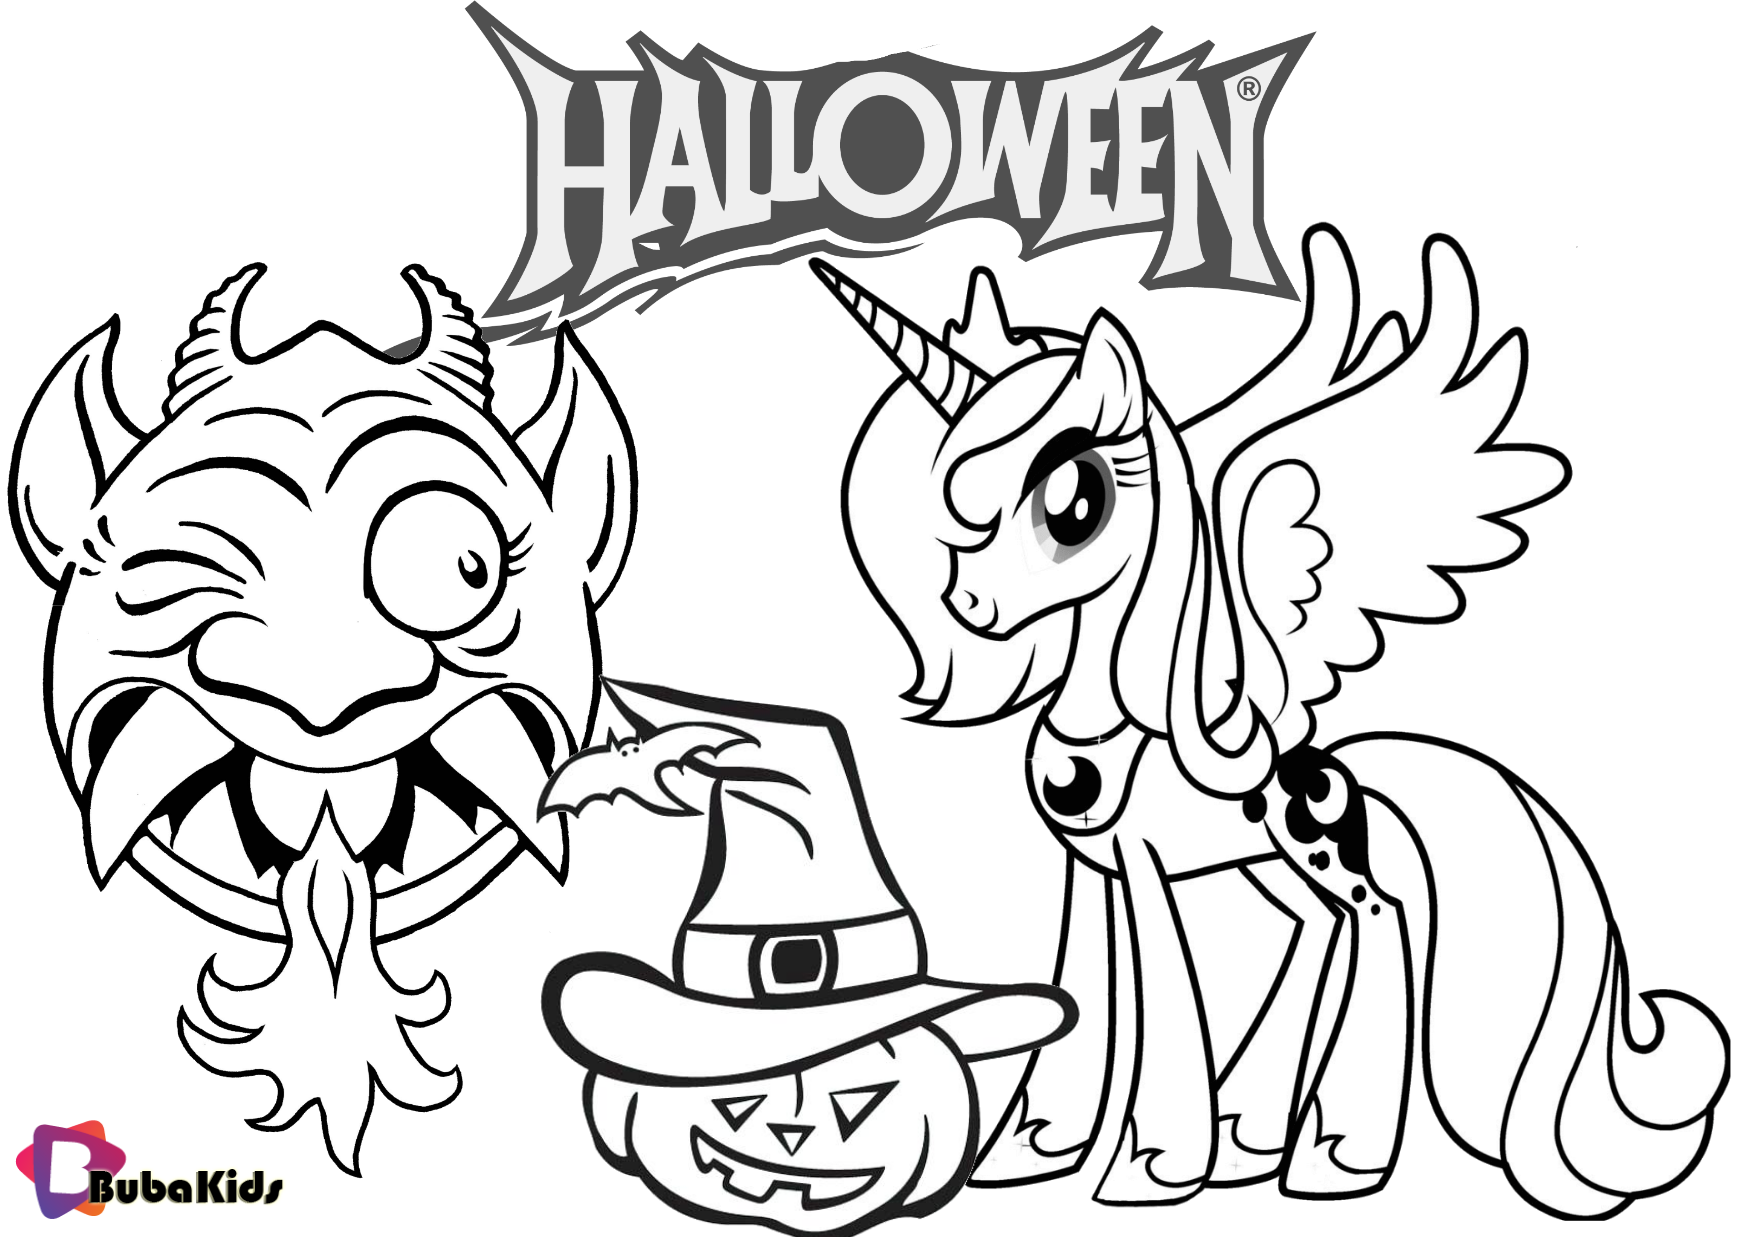 Halloween unicorn and balrog printable coloring pages. Wallpaper